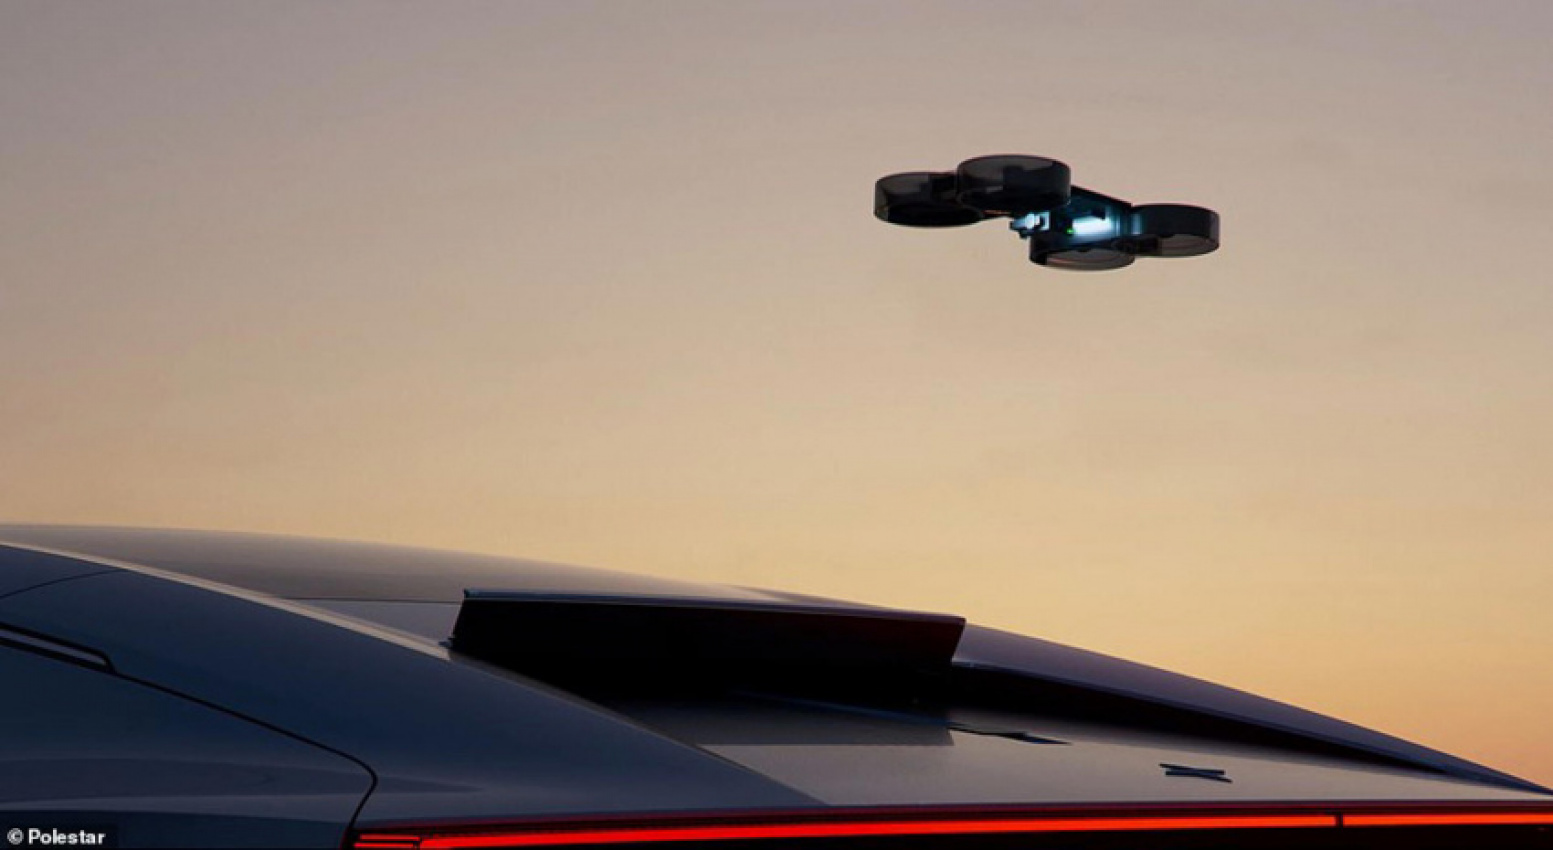 autos, cars, polestar, ram, an influencer's dream car: polestar unveils its electric o2 roadster that comes with a drone to film every journey from the sky for you to post to instagram